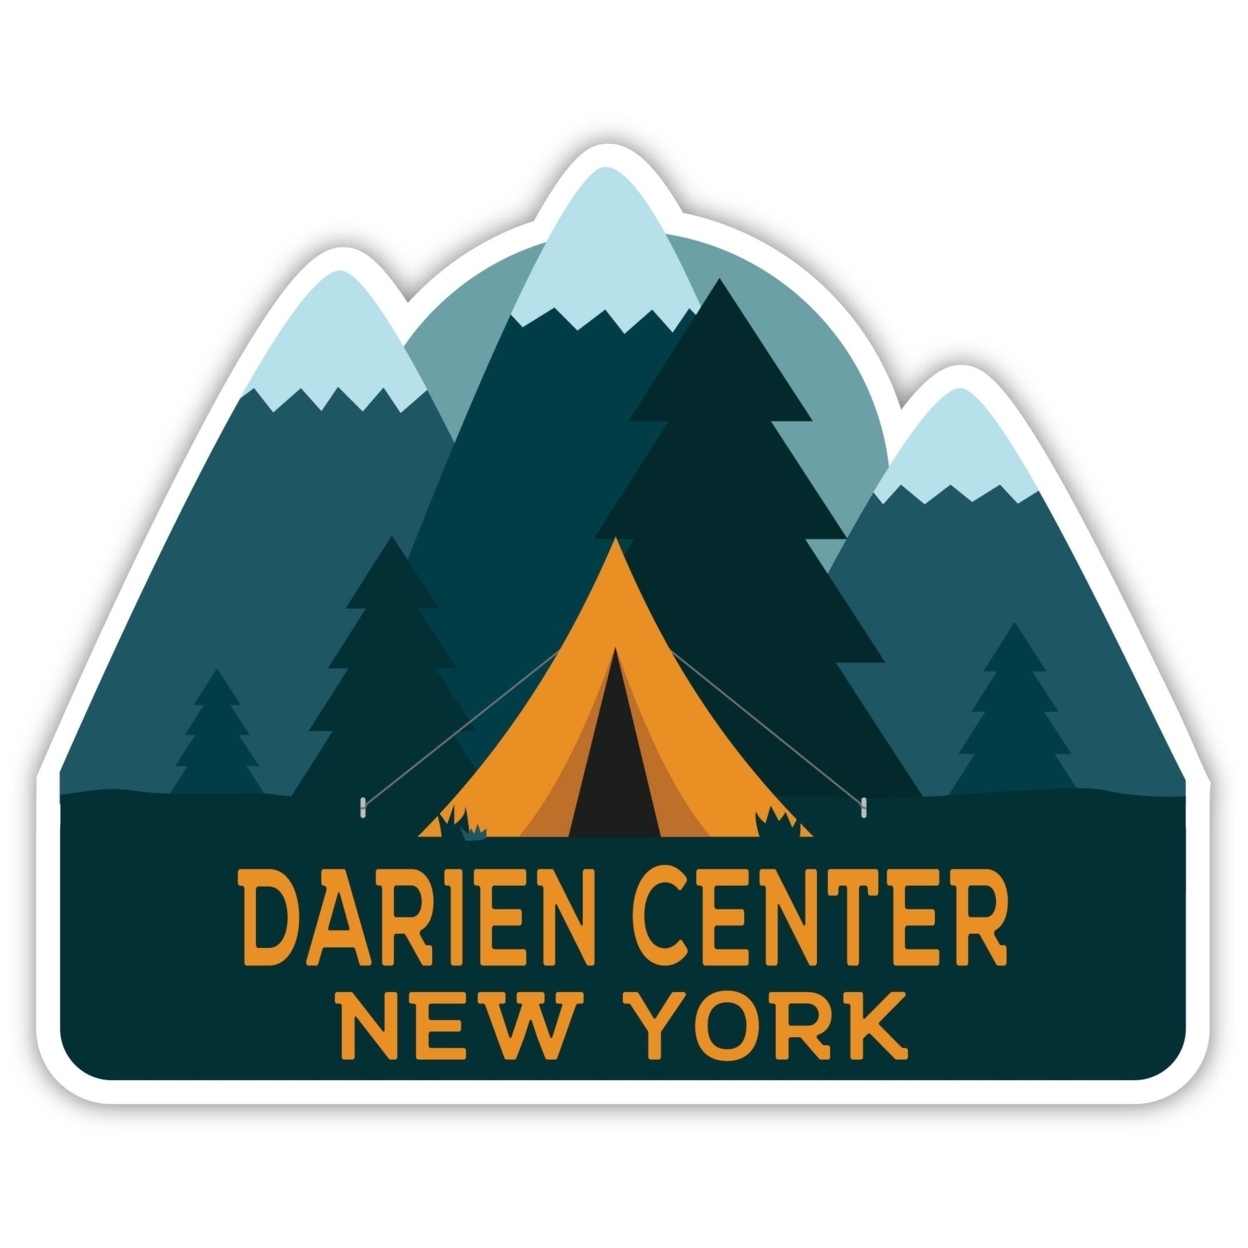 Darien Center New York Souvenir Decorative Stickers (Choose Theme And Size) - 4-Pack, 2-Inch, Tent